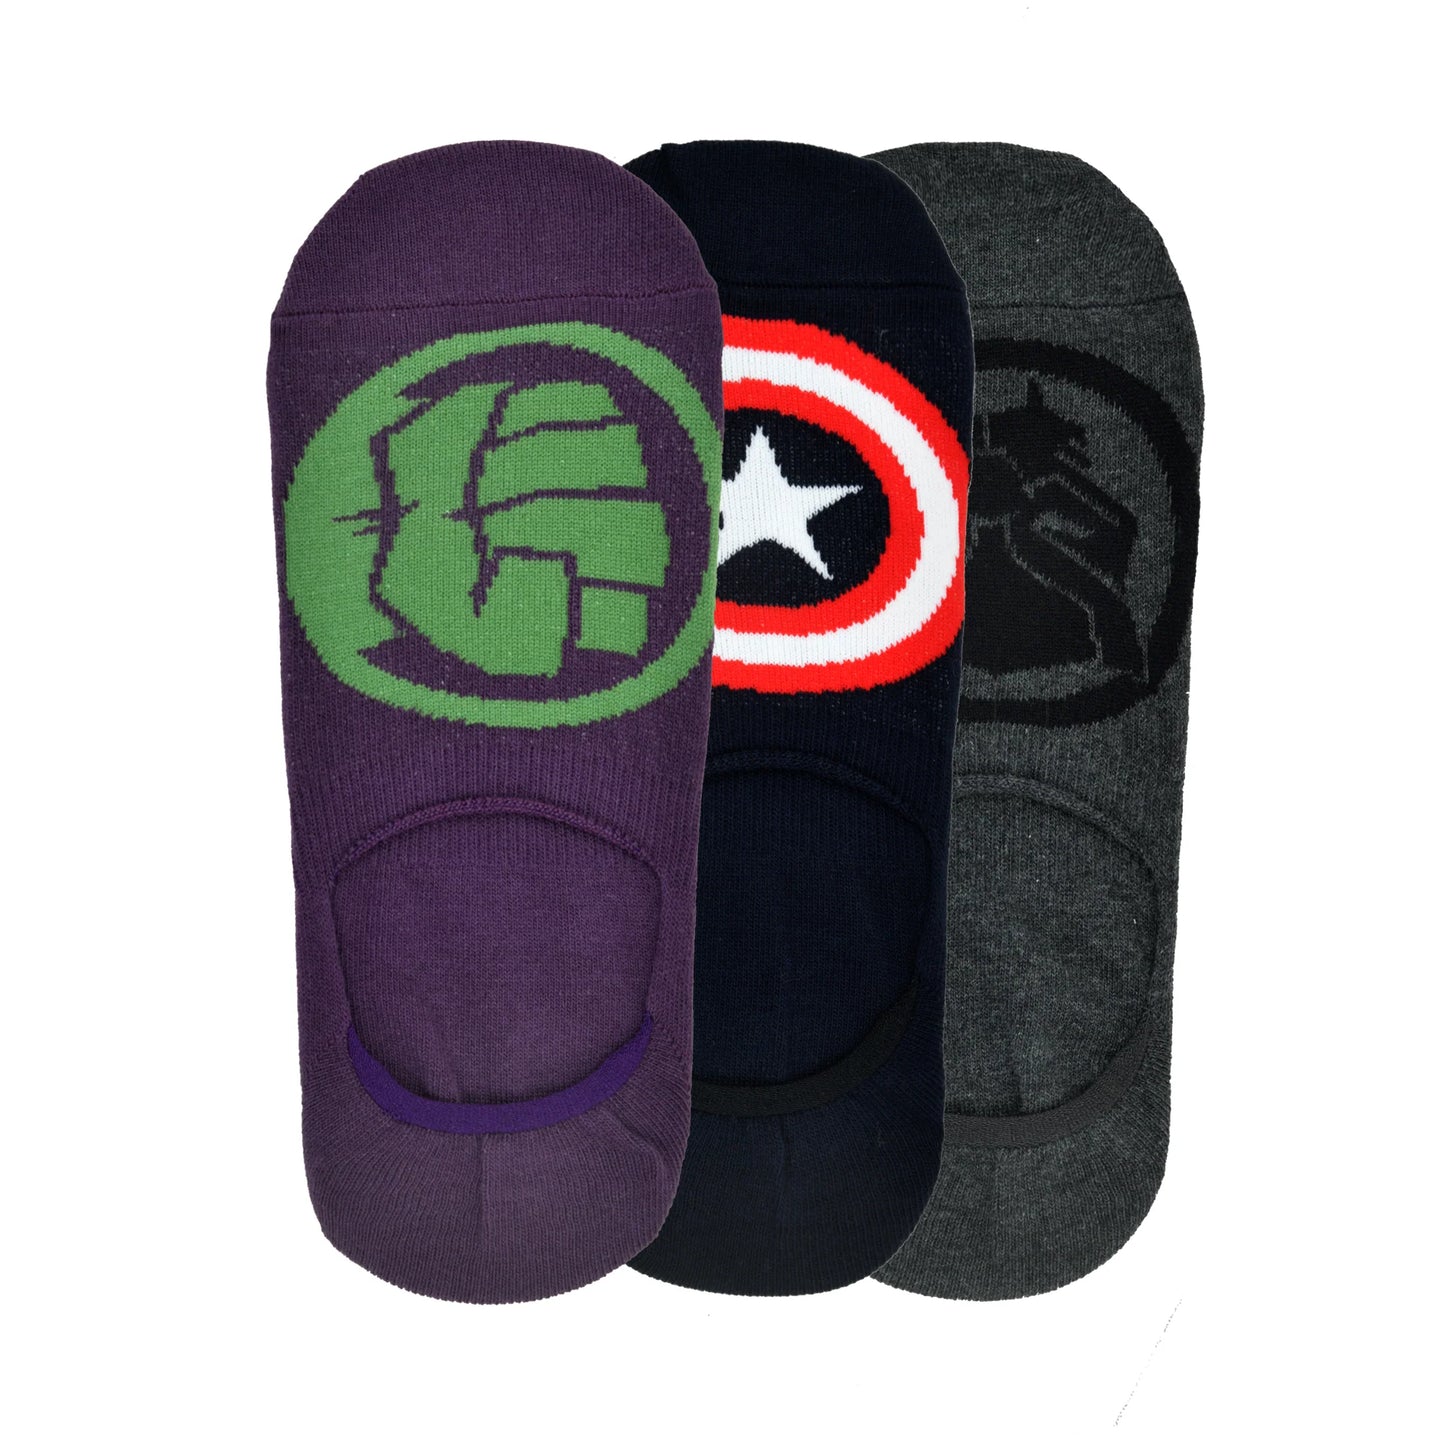 BALENZIA X MARVEL BLACK PANTHER,CAPTAIN AMERICA & HULK LOGO LOAFER/INVISIBLE SOCKS FOR MEN-(PACK OF 3 PAIRS/1U)(FREE SIZE)GREY,NAVY,PURPLE